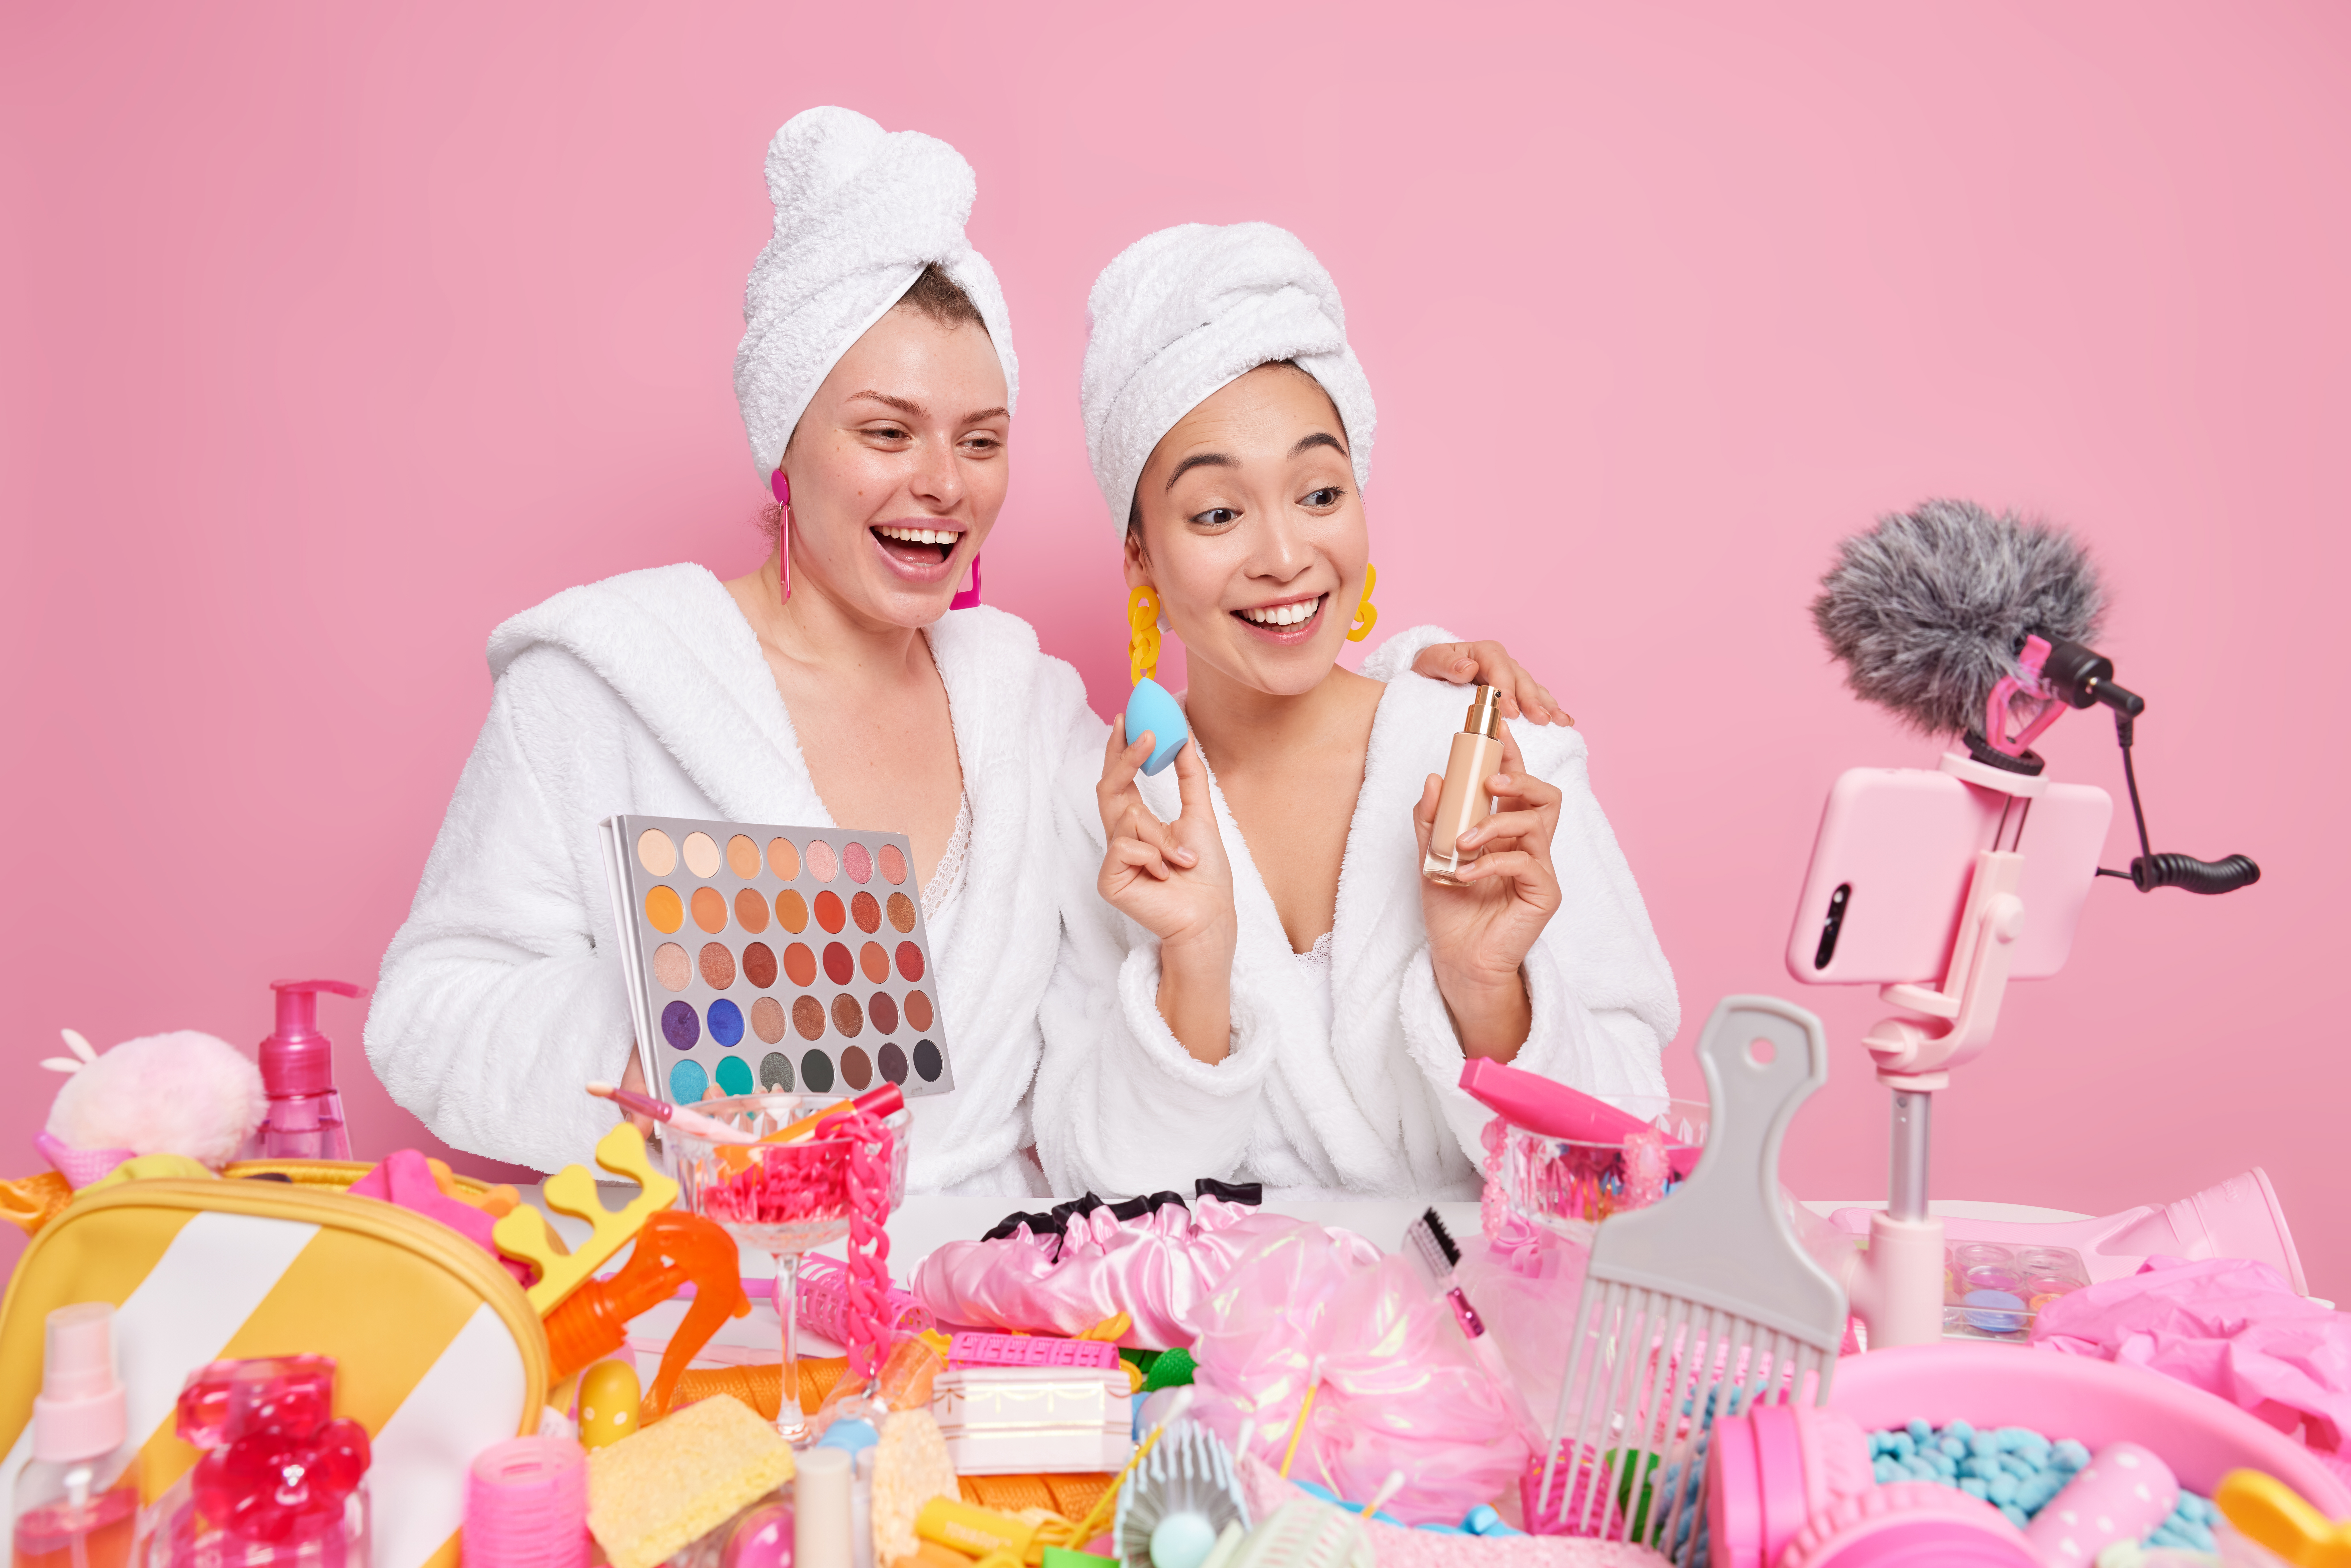 Two Happy Women Creat Beuth Blog Content Talk About Cosmetic Products Holds Colorful Eyeshadow Palette And Foundation Gives Make Up And Skin Care Tips To Followers Record Live Streaming Video - Contabilidade digital em São Paulo – SP